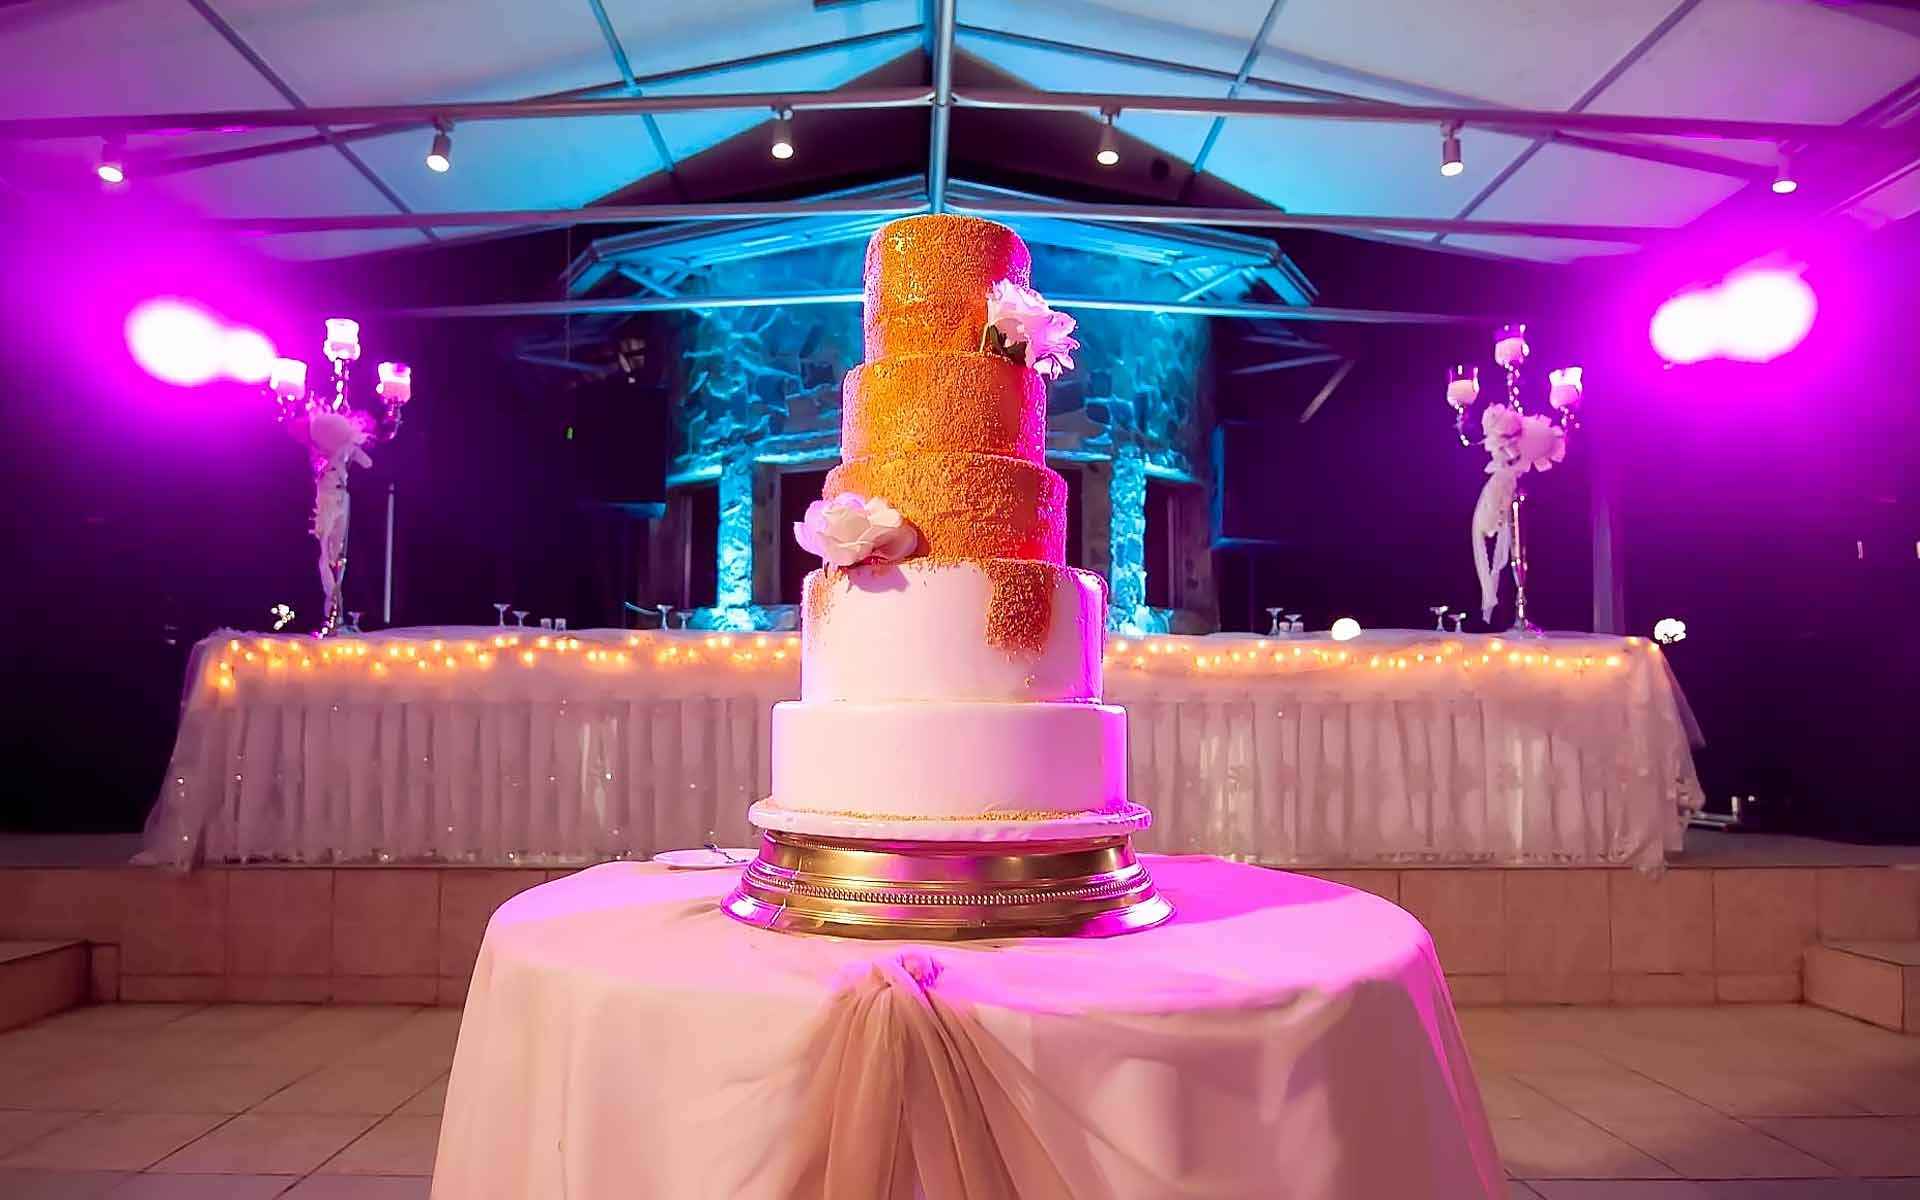 A-Glorious-Gold-Wedding-Cake-For-Your-Special-Day-by-Diamond-Events-Wedding-Event-planning-services